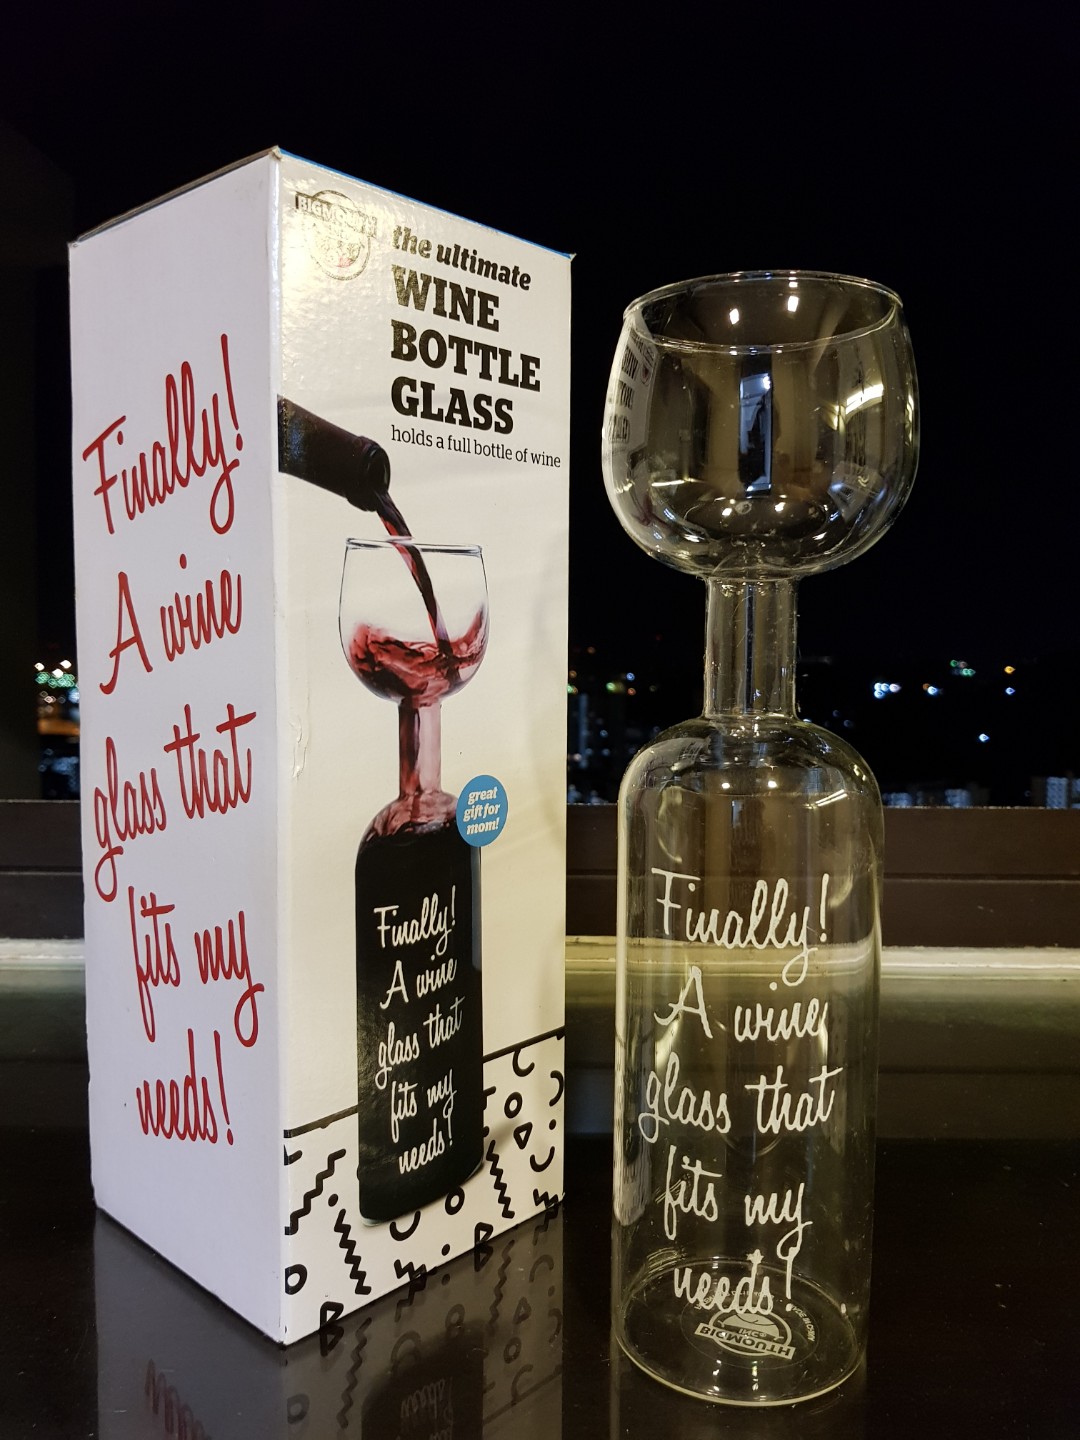 https://media.karousell.com/media/photos/products/2019/03/07/bigmouth_inc_ultimate_wine_bottle_glass_1551920579_2a7a64ba.jpg